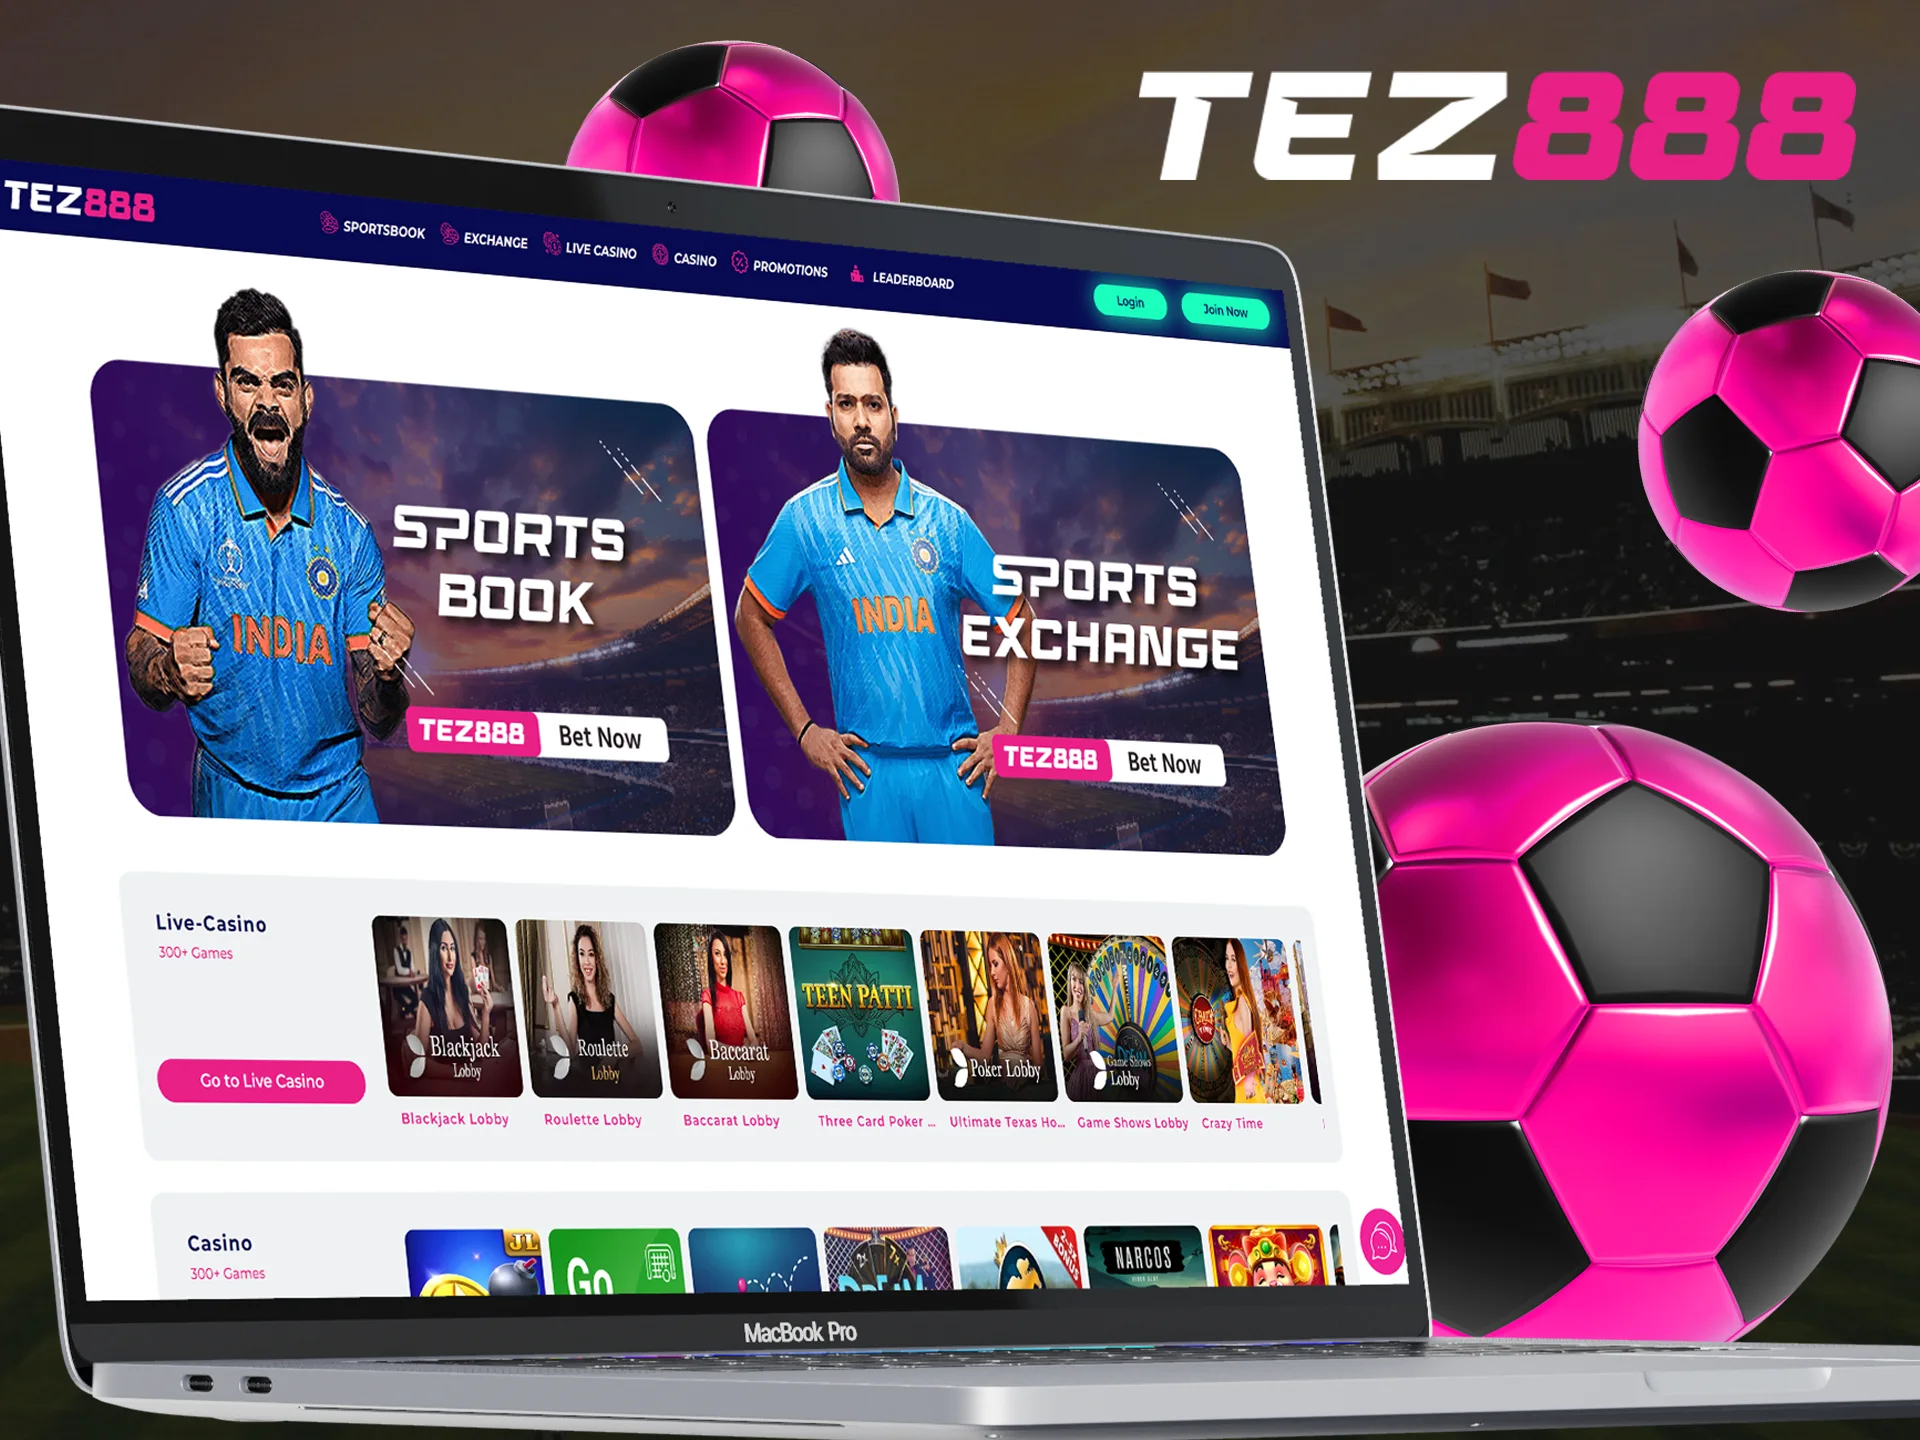 Go to the sports section at Tez888 to find football events.